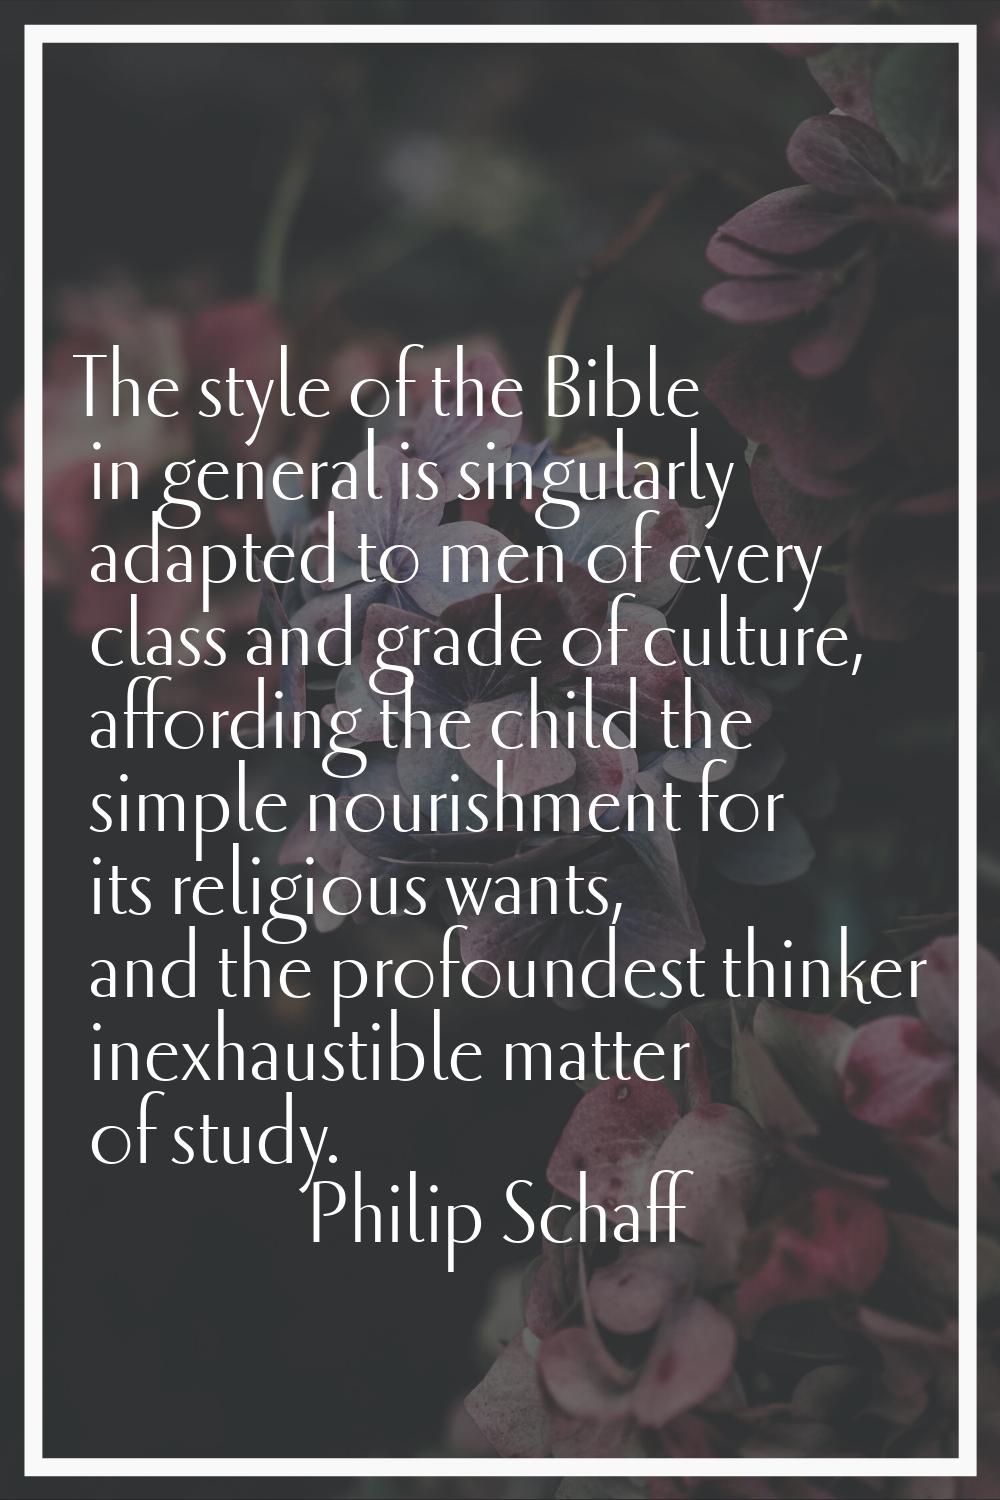 The style of the Bible in general is singularly adapted to men of every class and grade of culture,